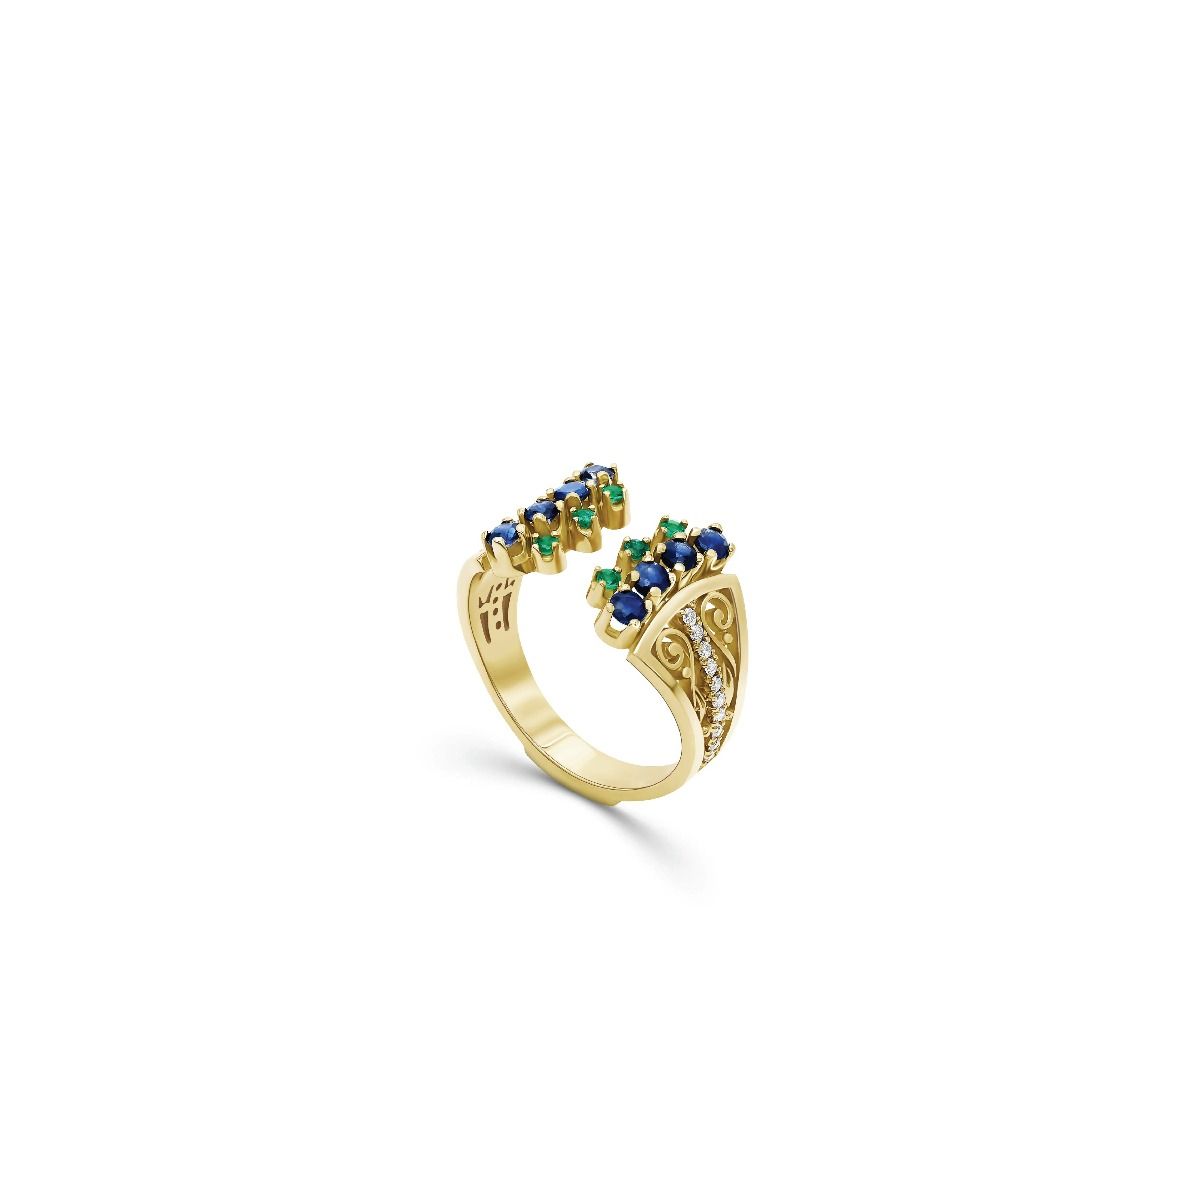 Ajouré Ottoman Ring by Azza Fahmy - Designer Rings